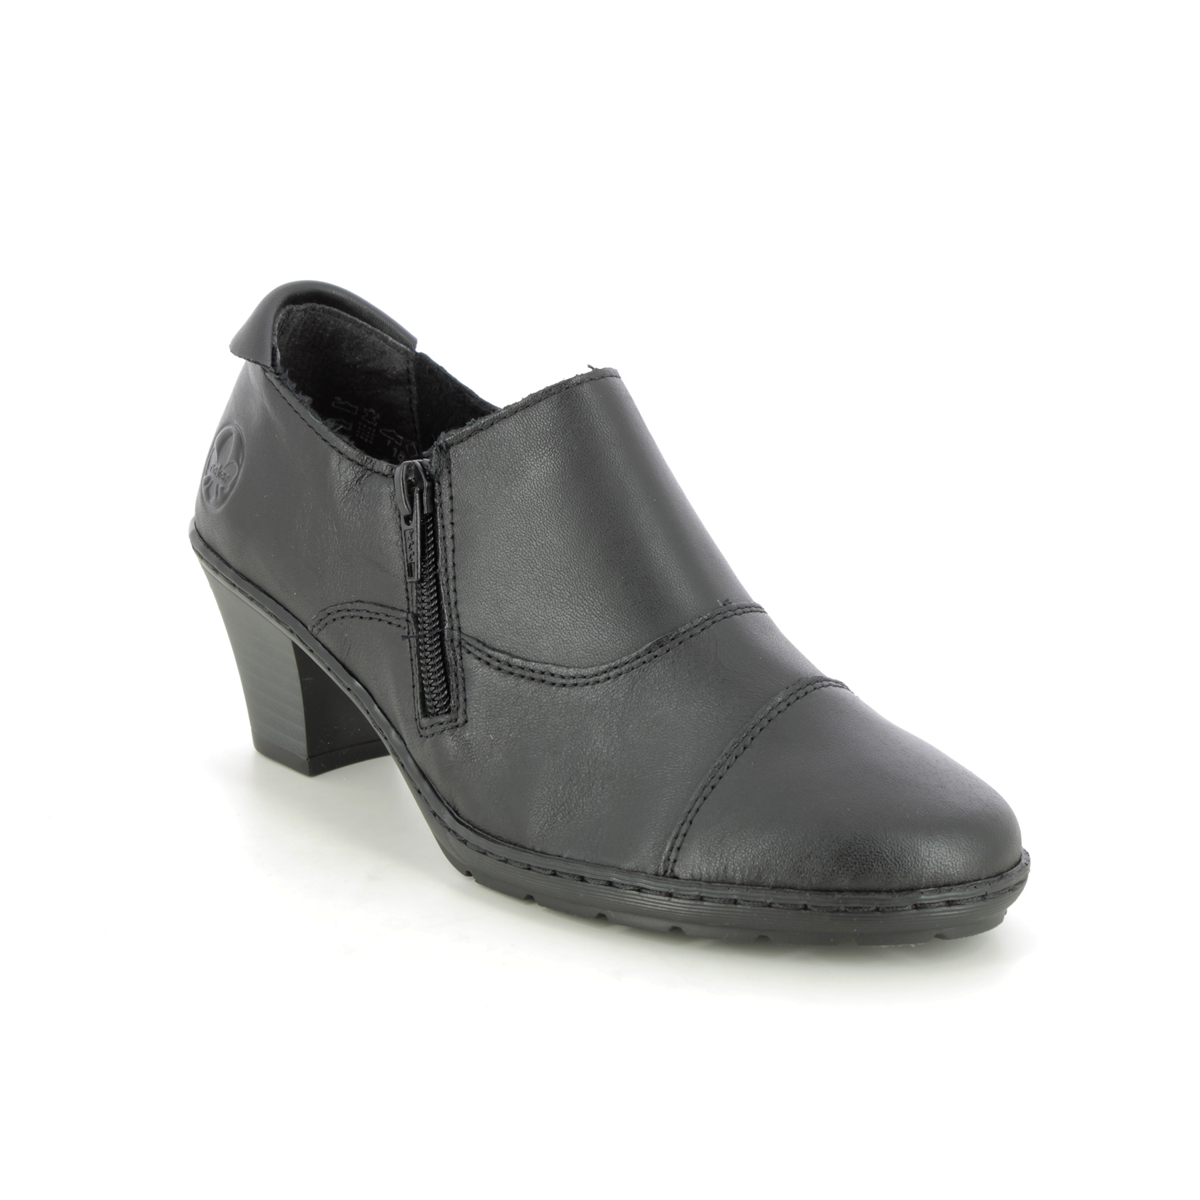 Rieker 57173-02 Black leather Womens shoe-boots in a Plain Leather in Size 41